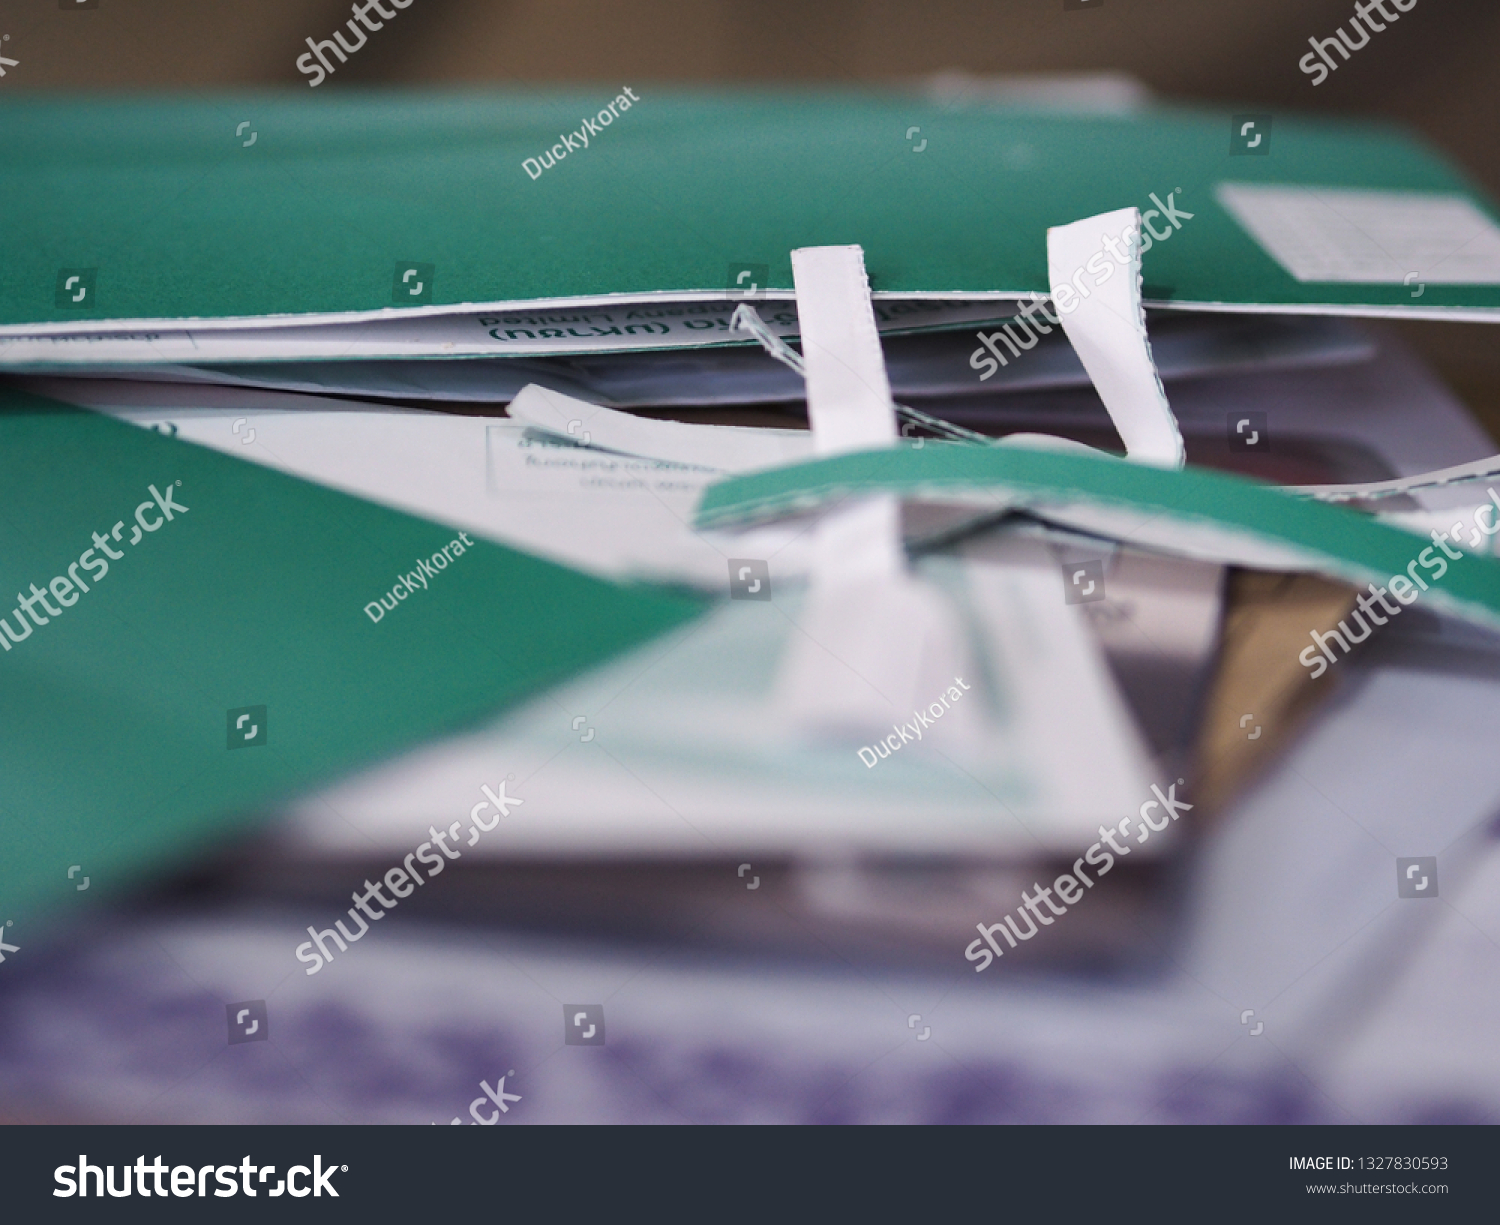 Envelopes from credit cards on a blurred background,selection focus only some point on image #1327830593